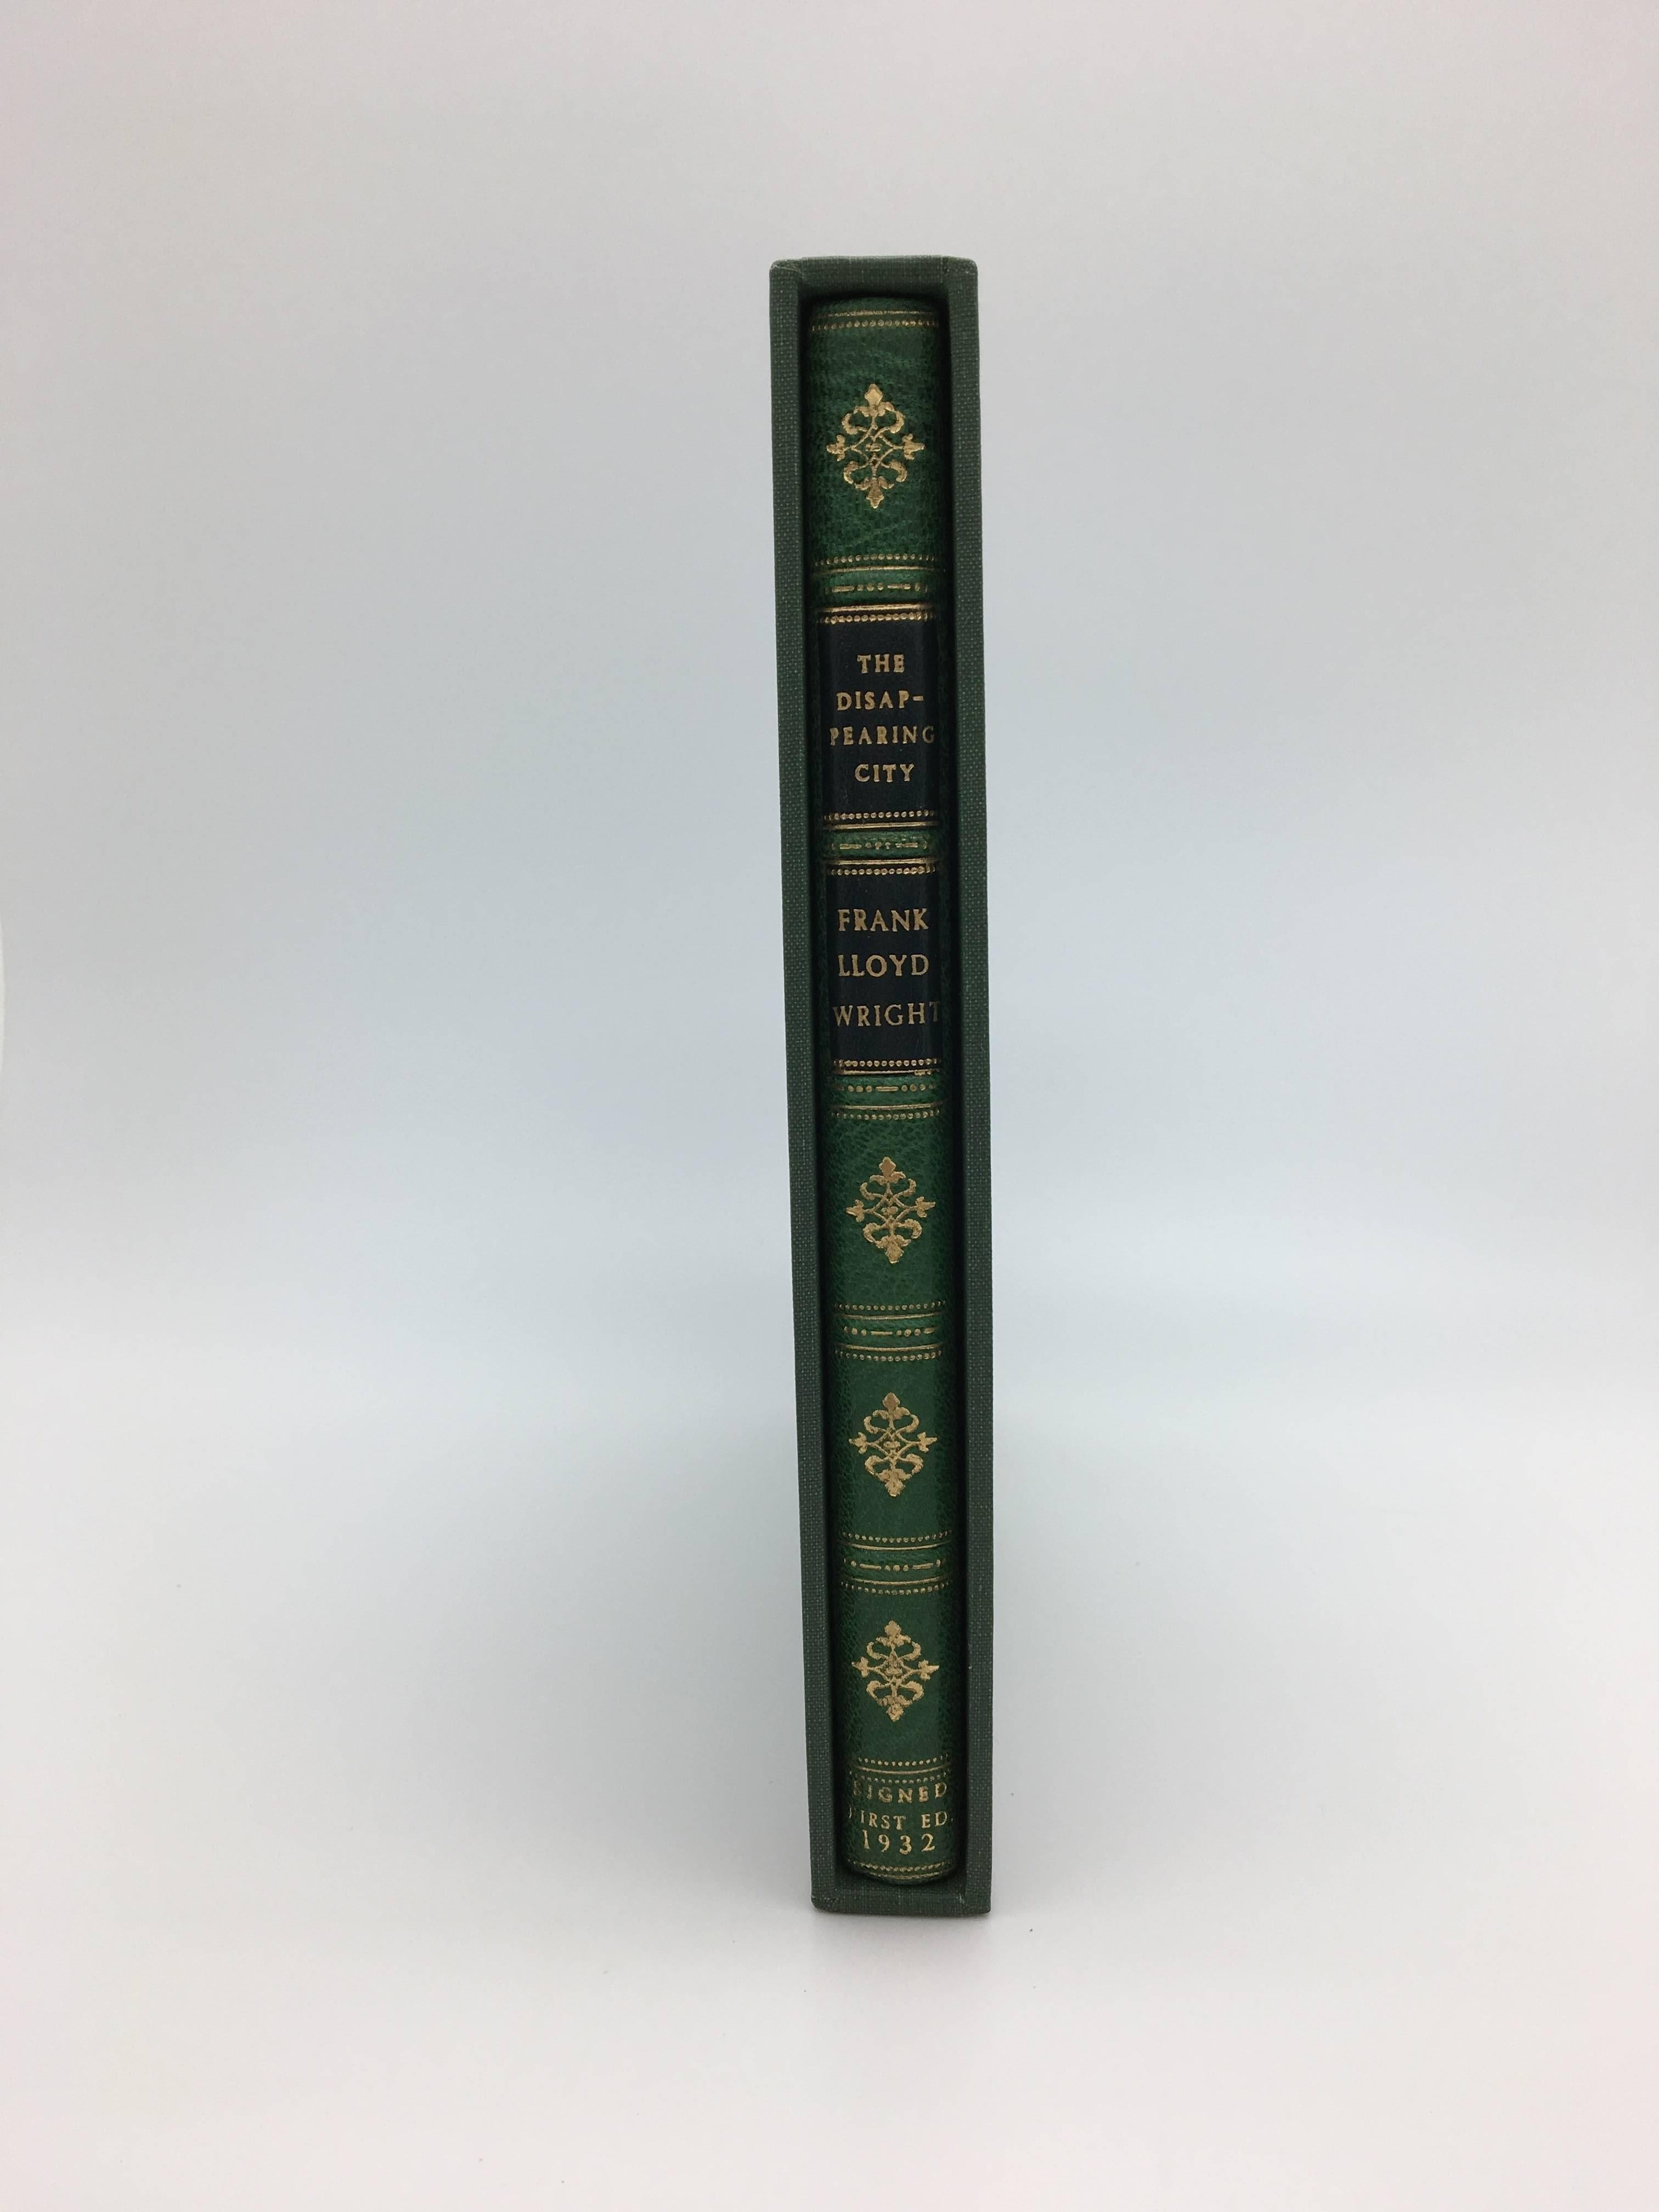 Wright, Frank Lloyd. The Disappearing City. New York: William Farquhar Payson, 1932. First Edition. Signed and Inscribed by Frank Lloyd Wright. Rebound in quarter leather boards with original green cloth cover transferred to custom built